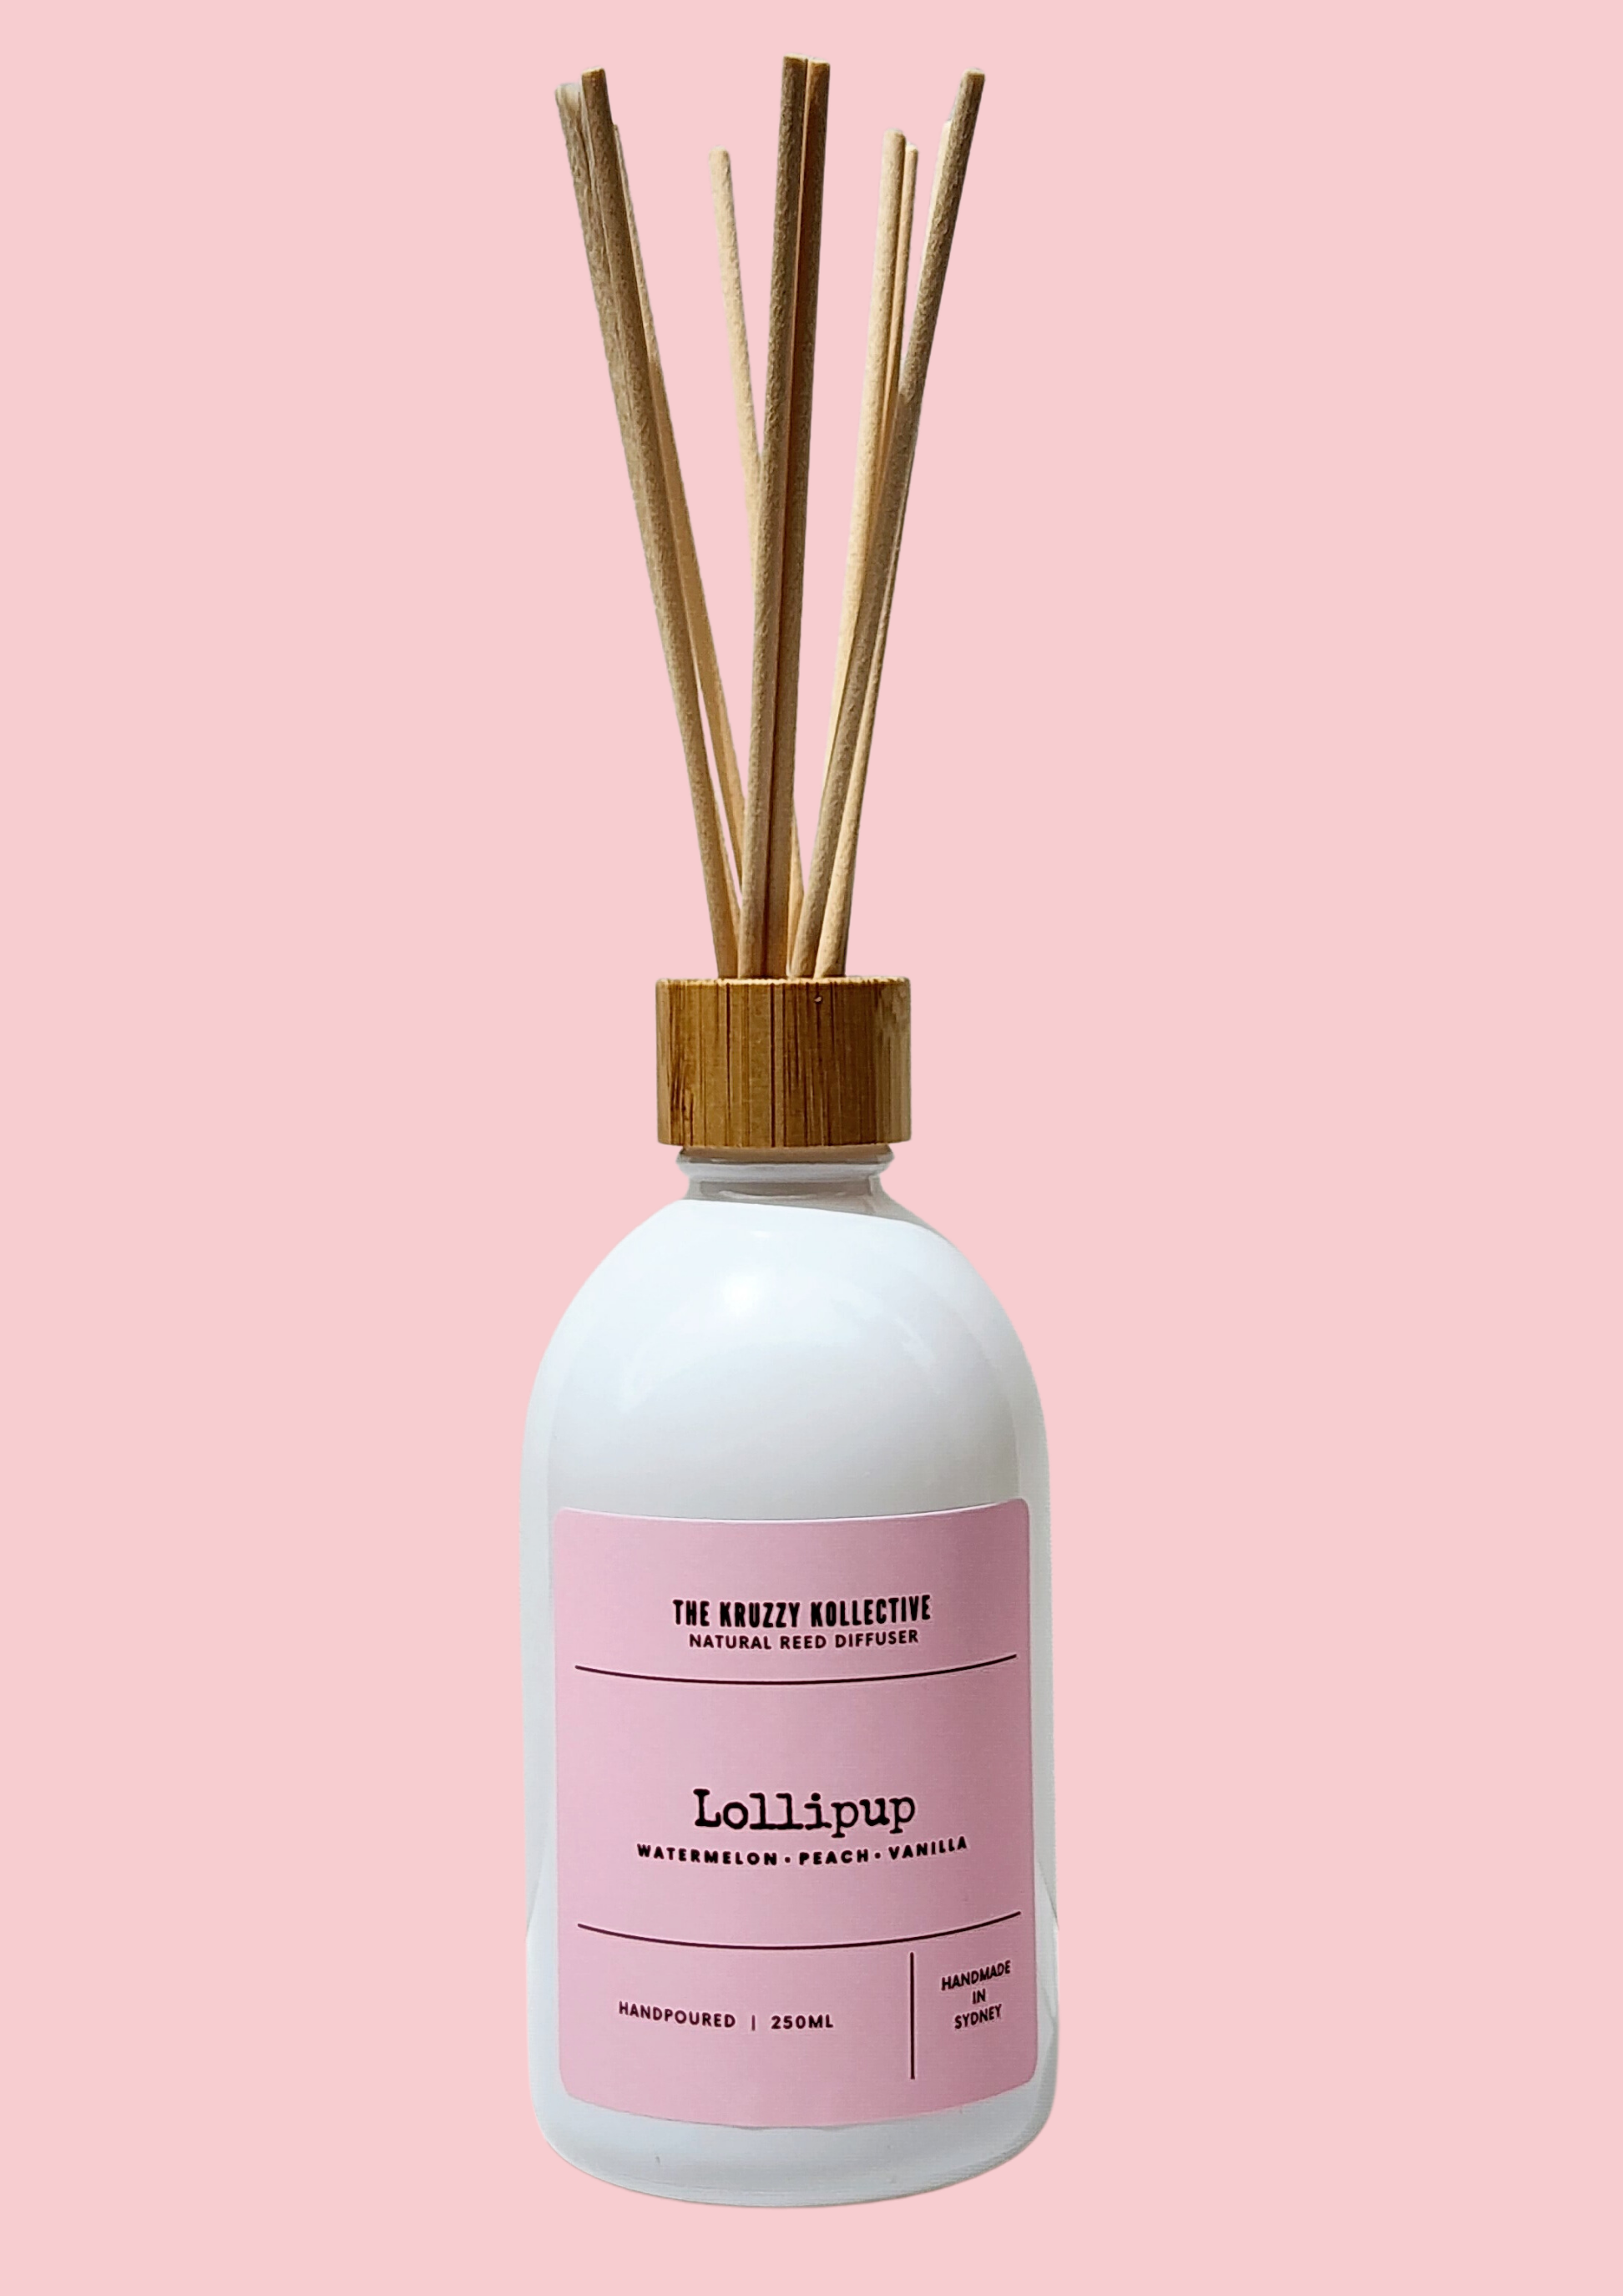 home fragrance natural reed diffuser best home scented fragrance watermelon vanilla